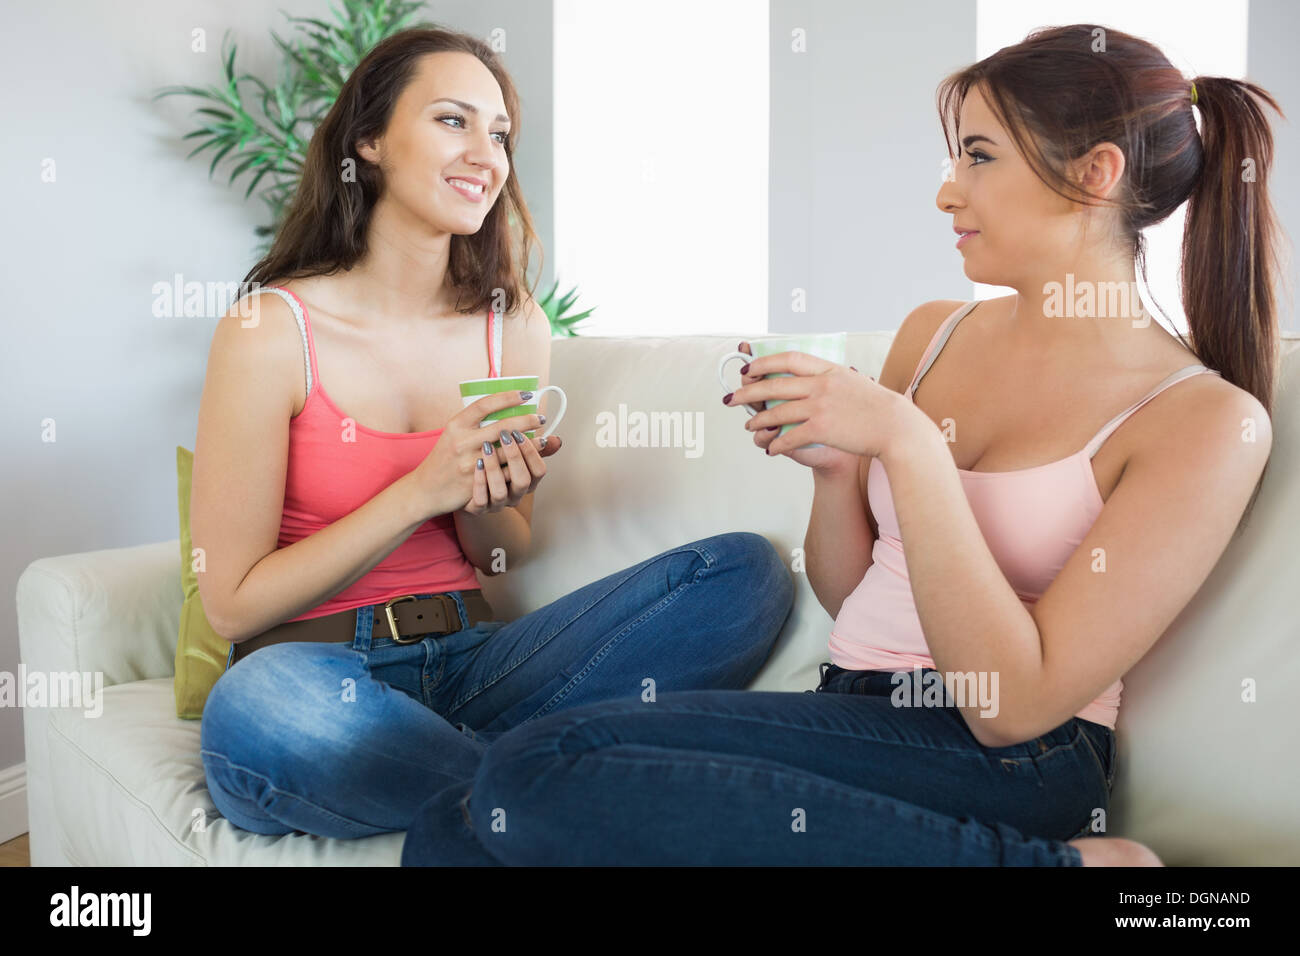 https://c8.alamy.com/comp/DGNAND/cute-young-women-holding-cups-sitting-on-a-couch-DGNAND.jpg